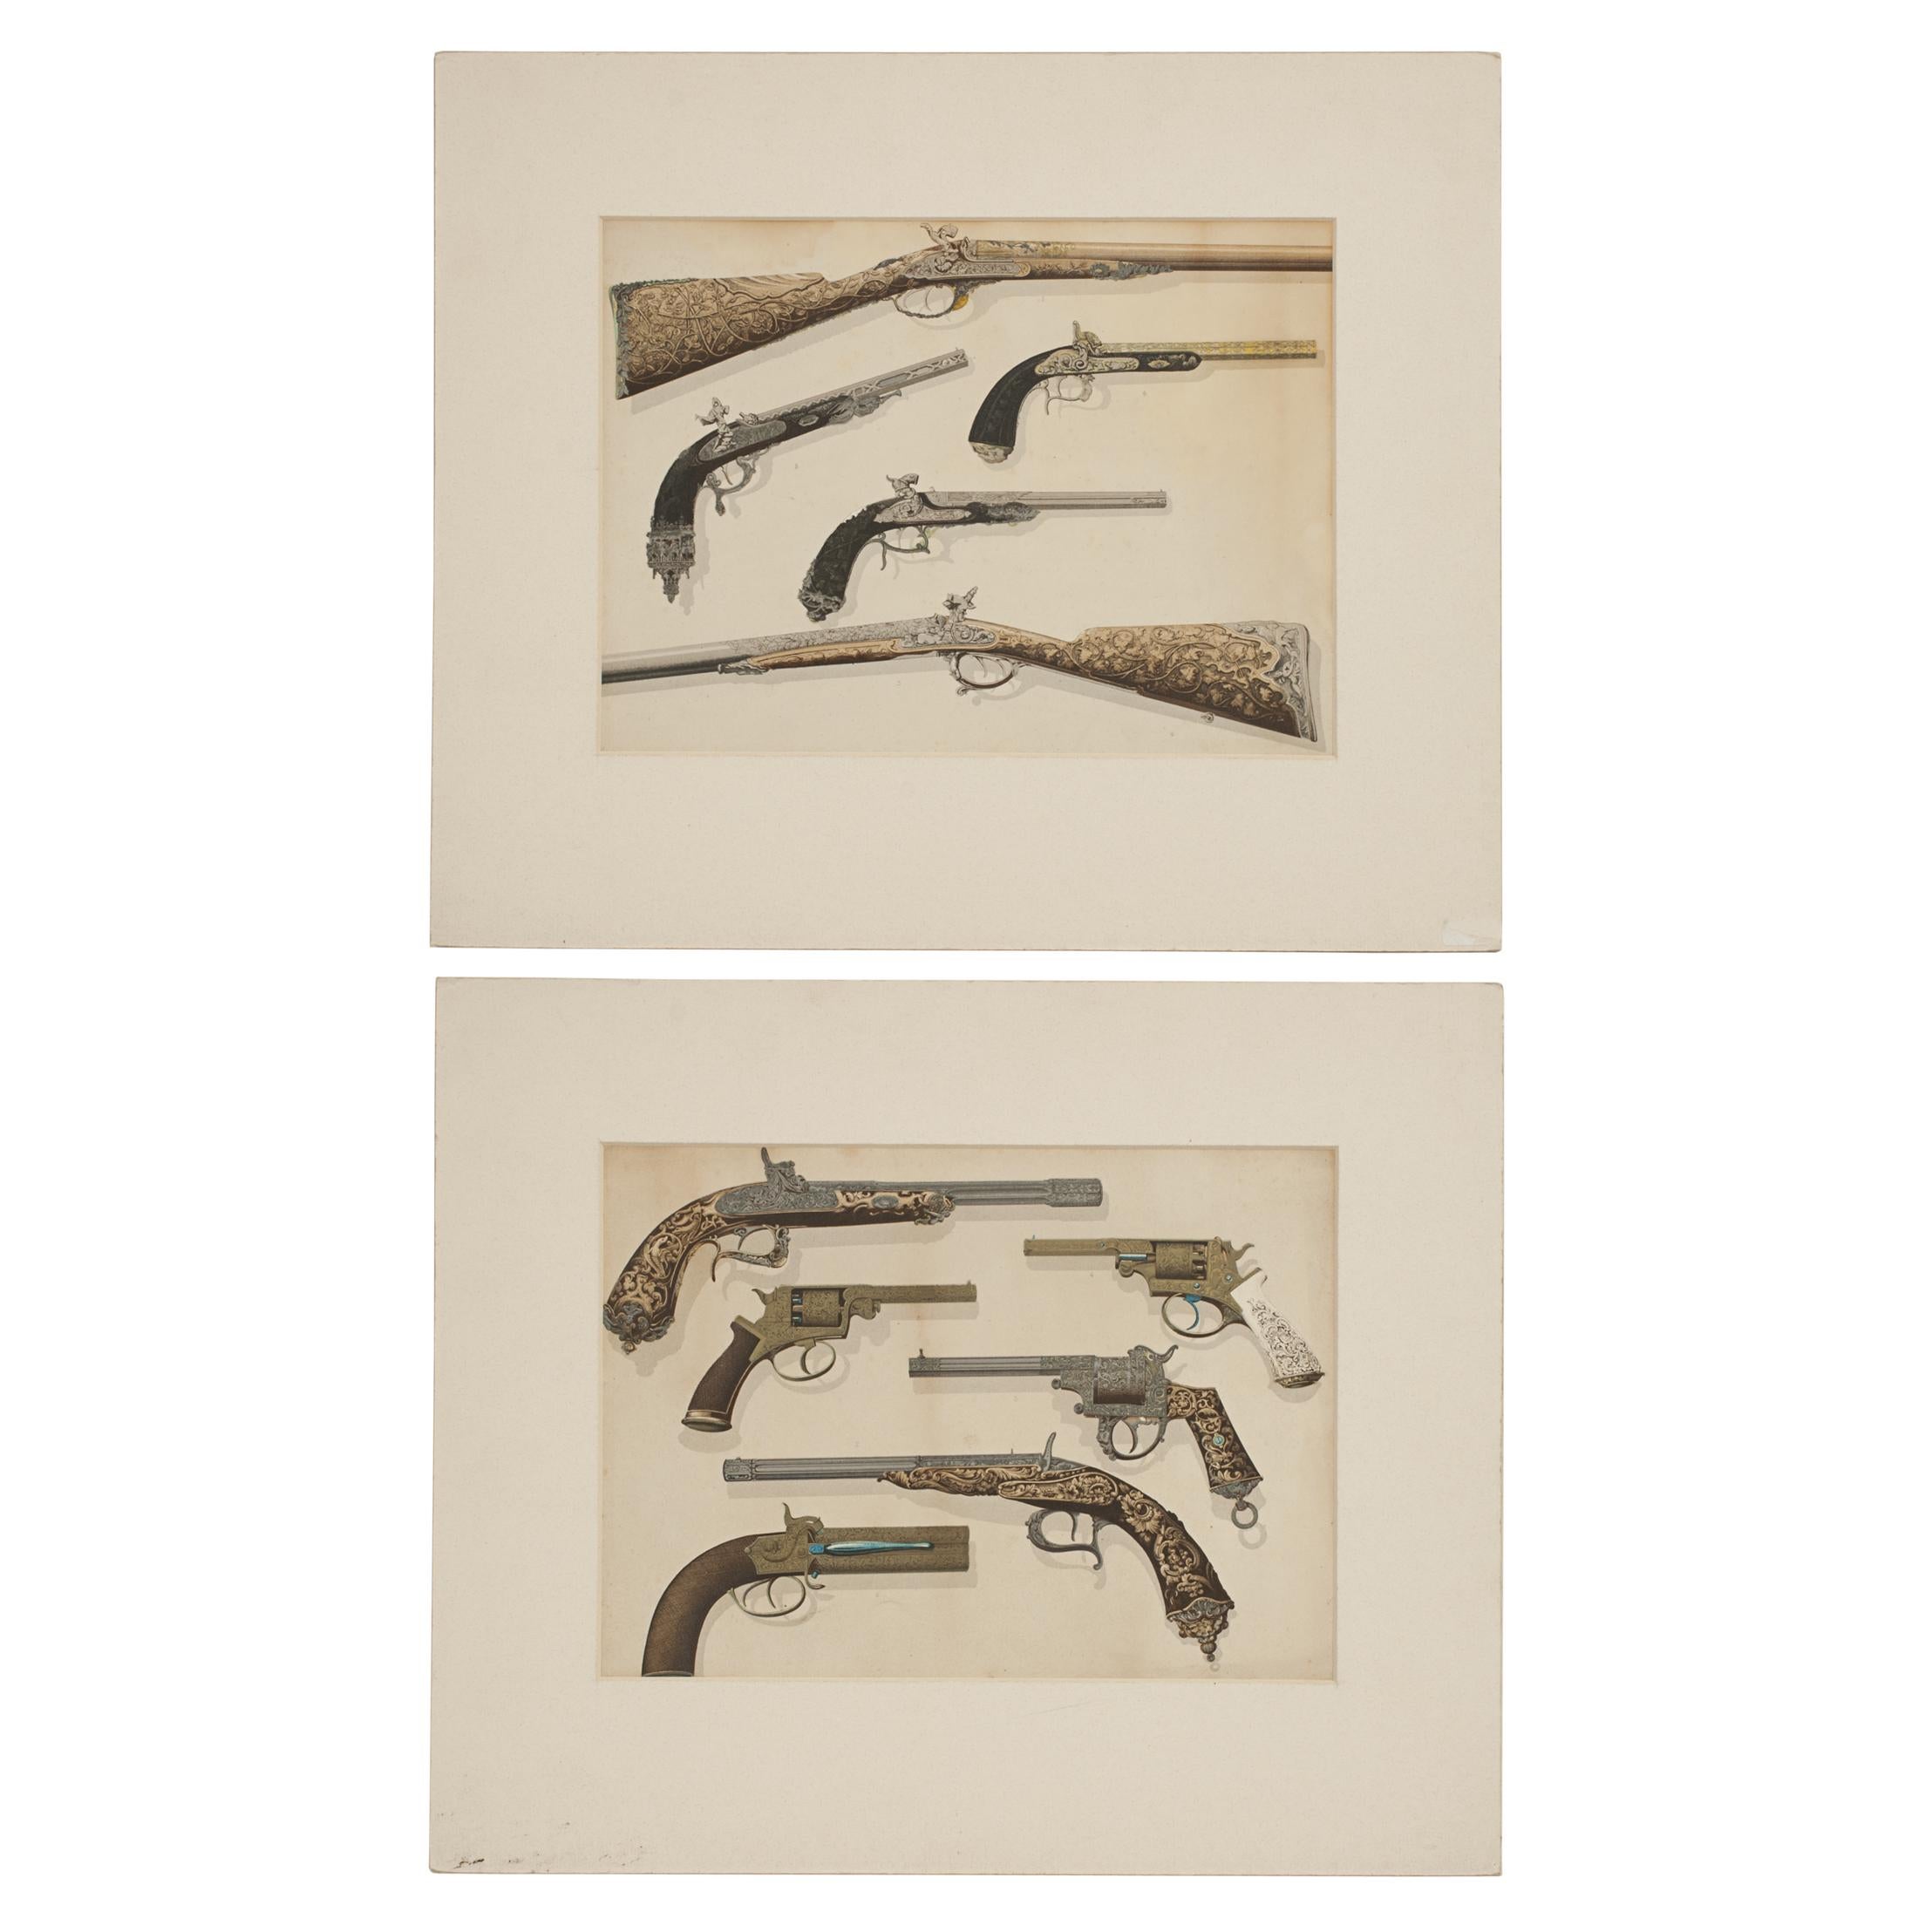 Pair of Antique Firearms, Guns, Pistols and Revolvers and Rifles Prints